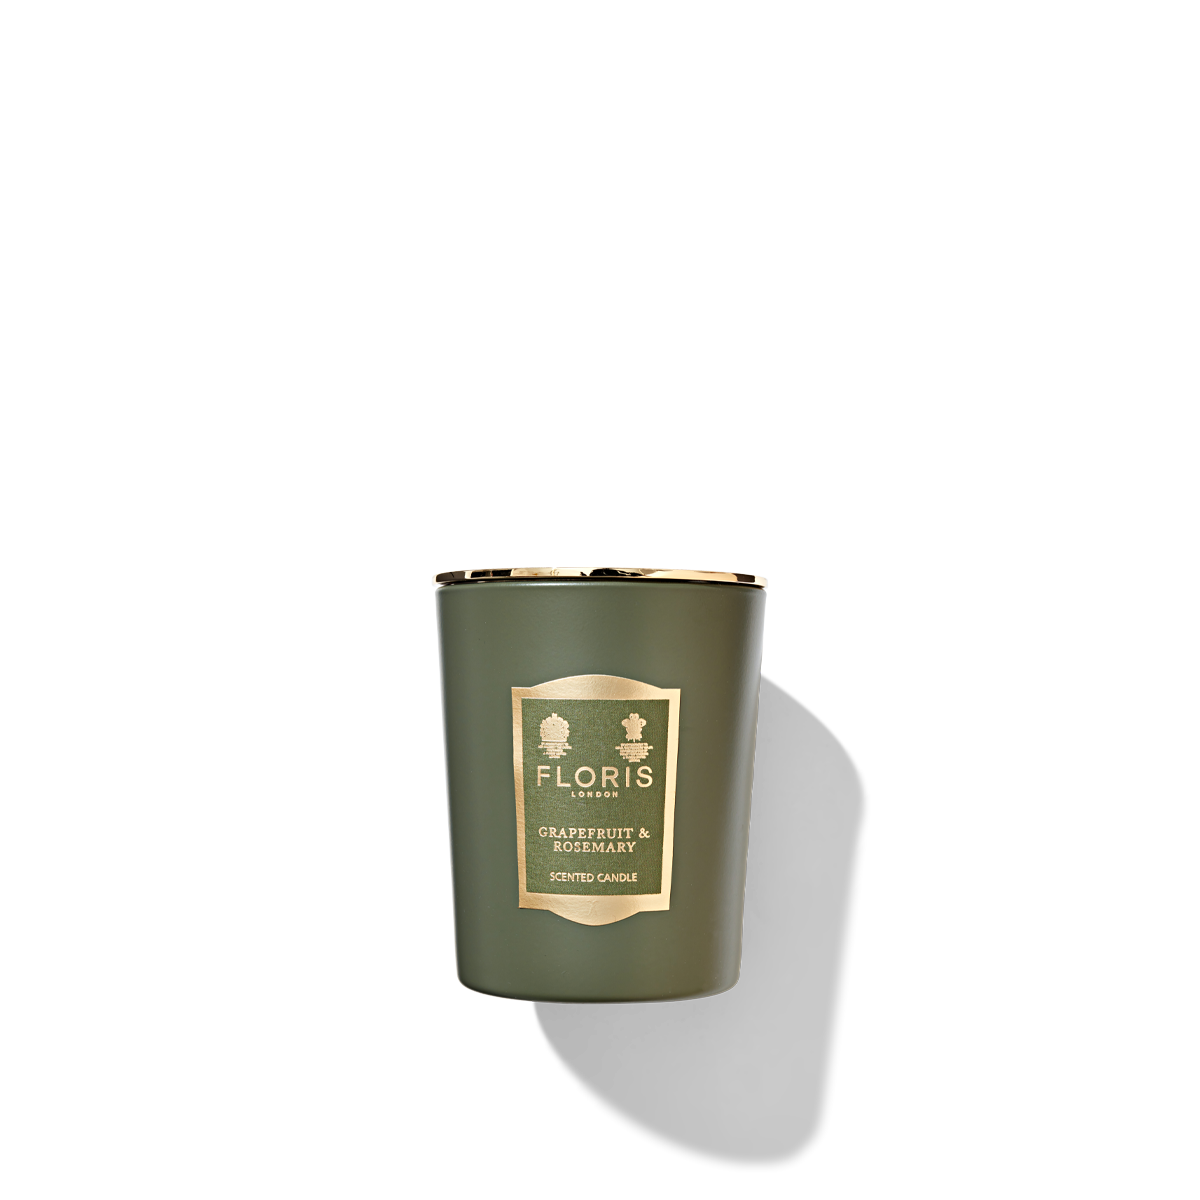 Green Floris London Grapefruit & Rosemary Scented Candle